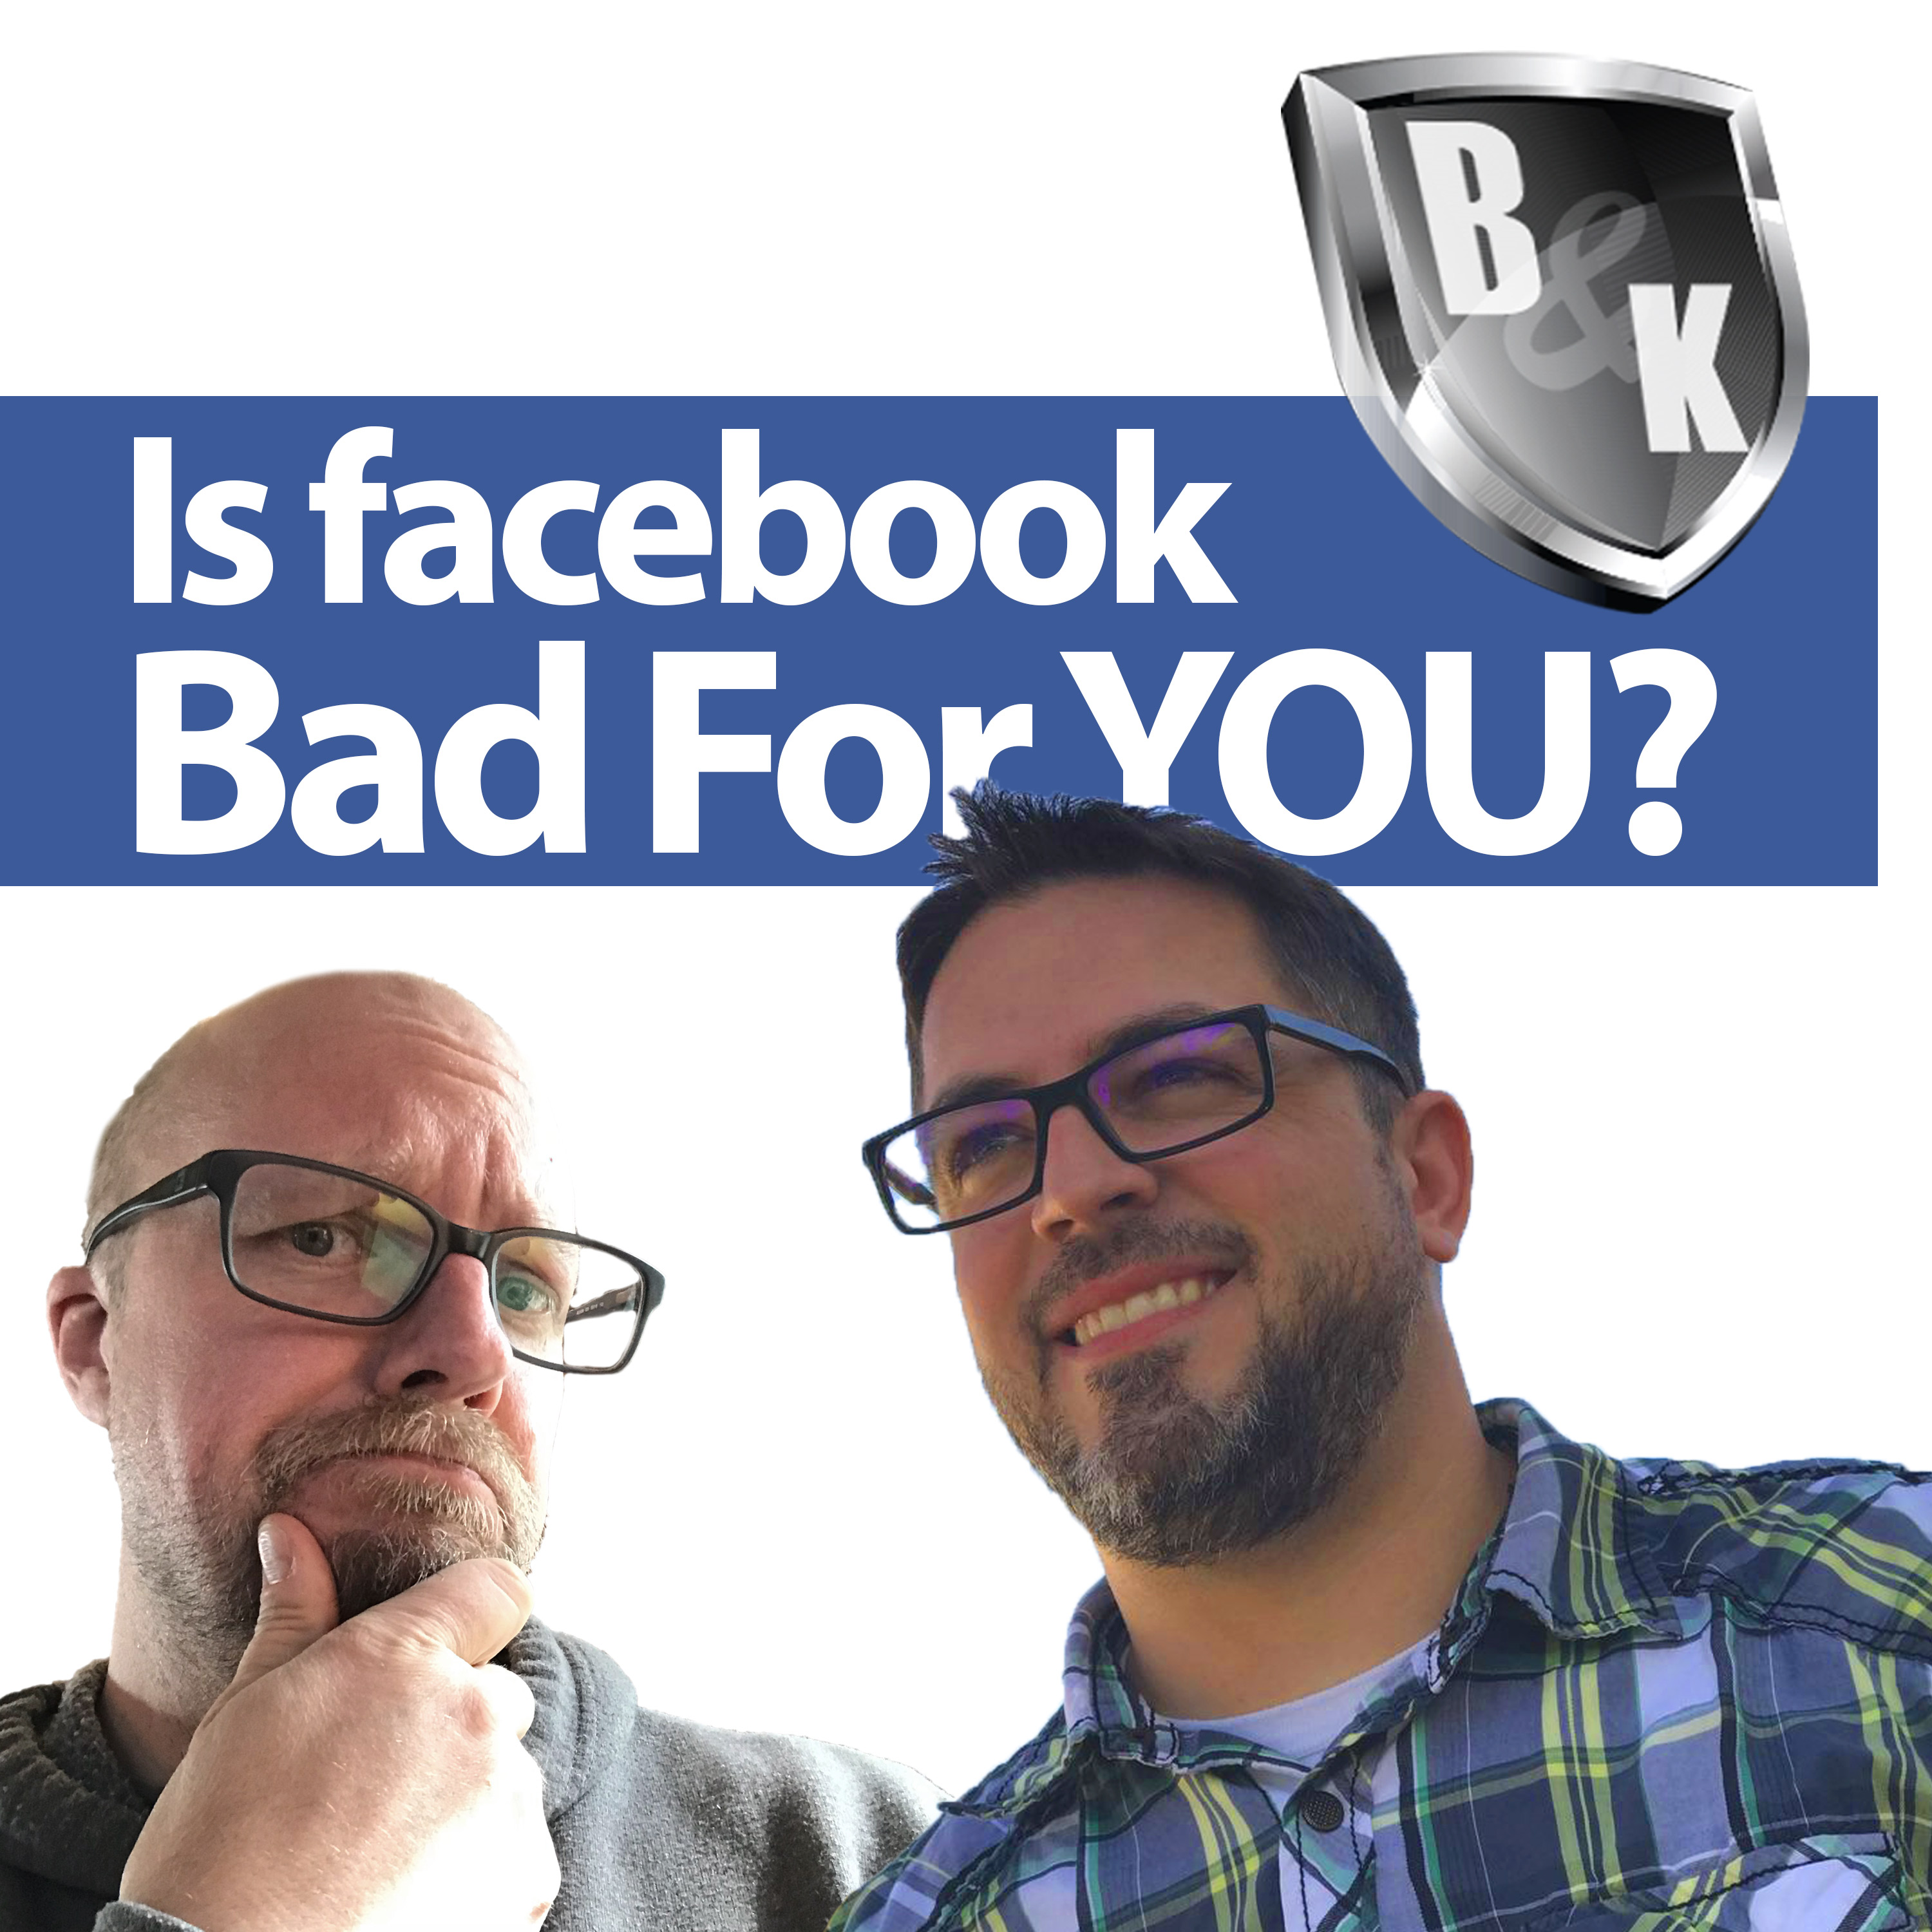 Ep. 002 - Is Facebook bad for you? Leaving Facebook, deleting your profile and more...